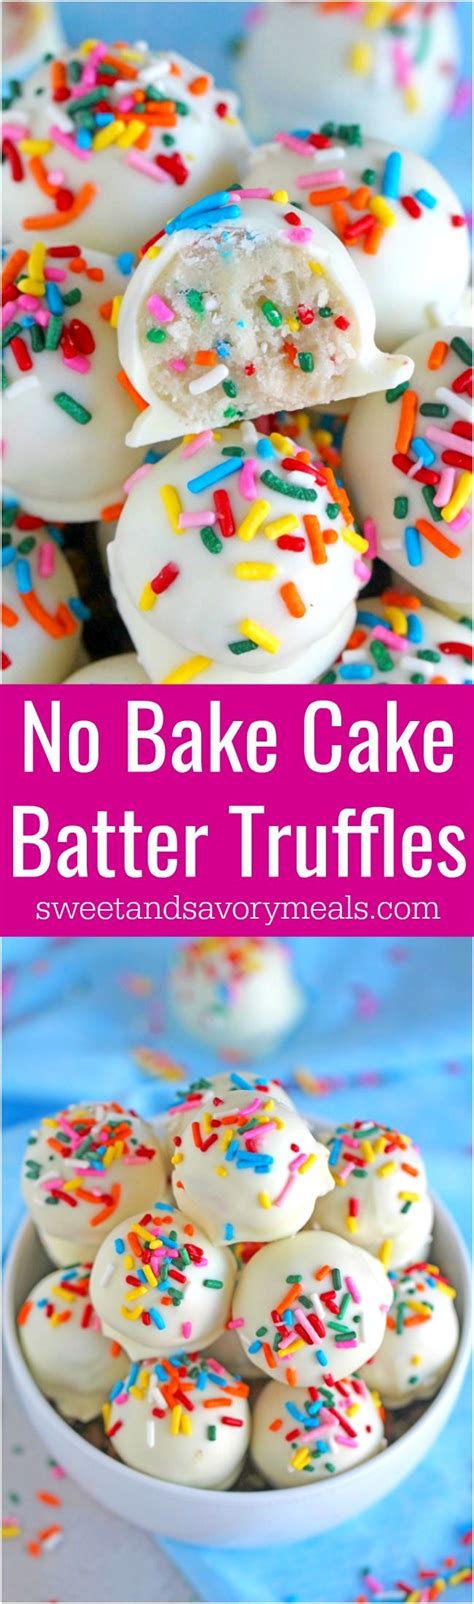 These i have not tried yet but have made red velvet cake truffles which you can find my red velvet cake truffle recipe listed under my recipes. No Bake Cake Batter Truffles | Recipe | Cake batter ...